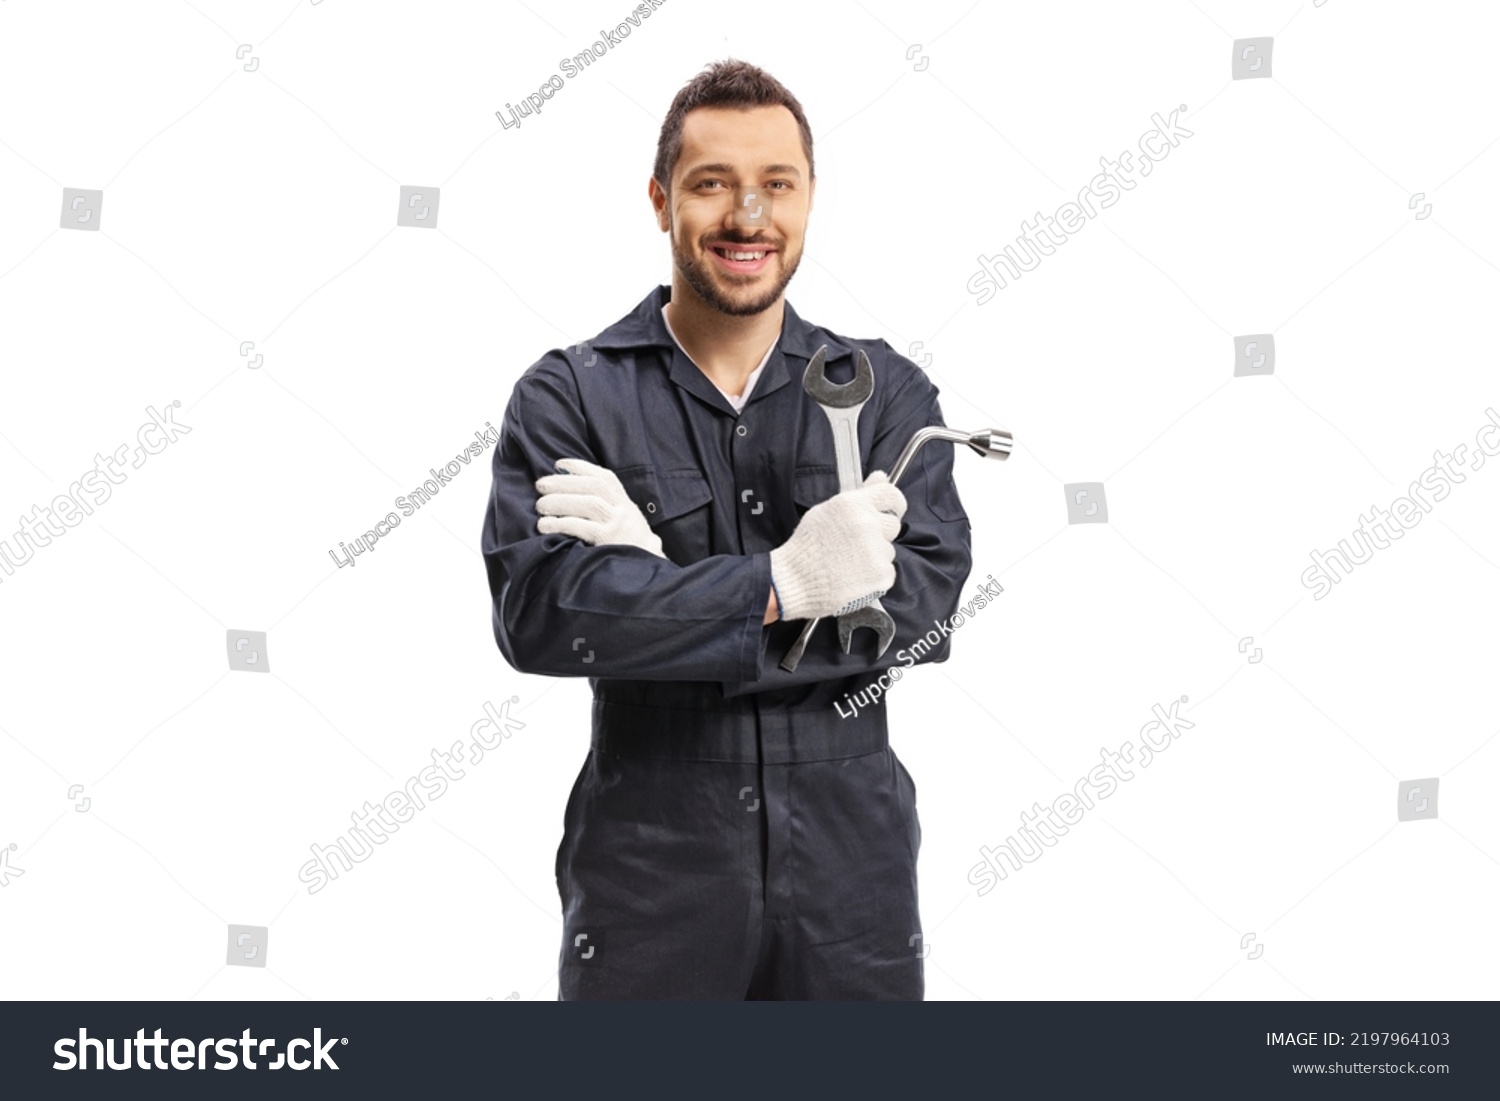 Car mechanic holding a wrench and a key tool isolated on white background #2197964103